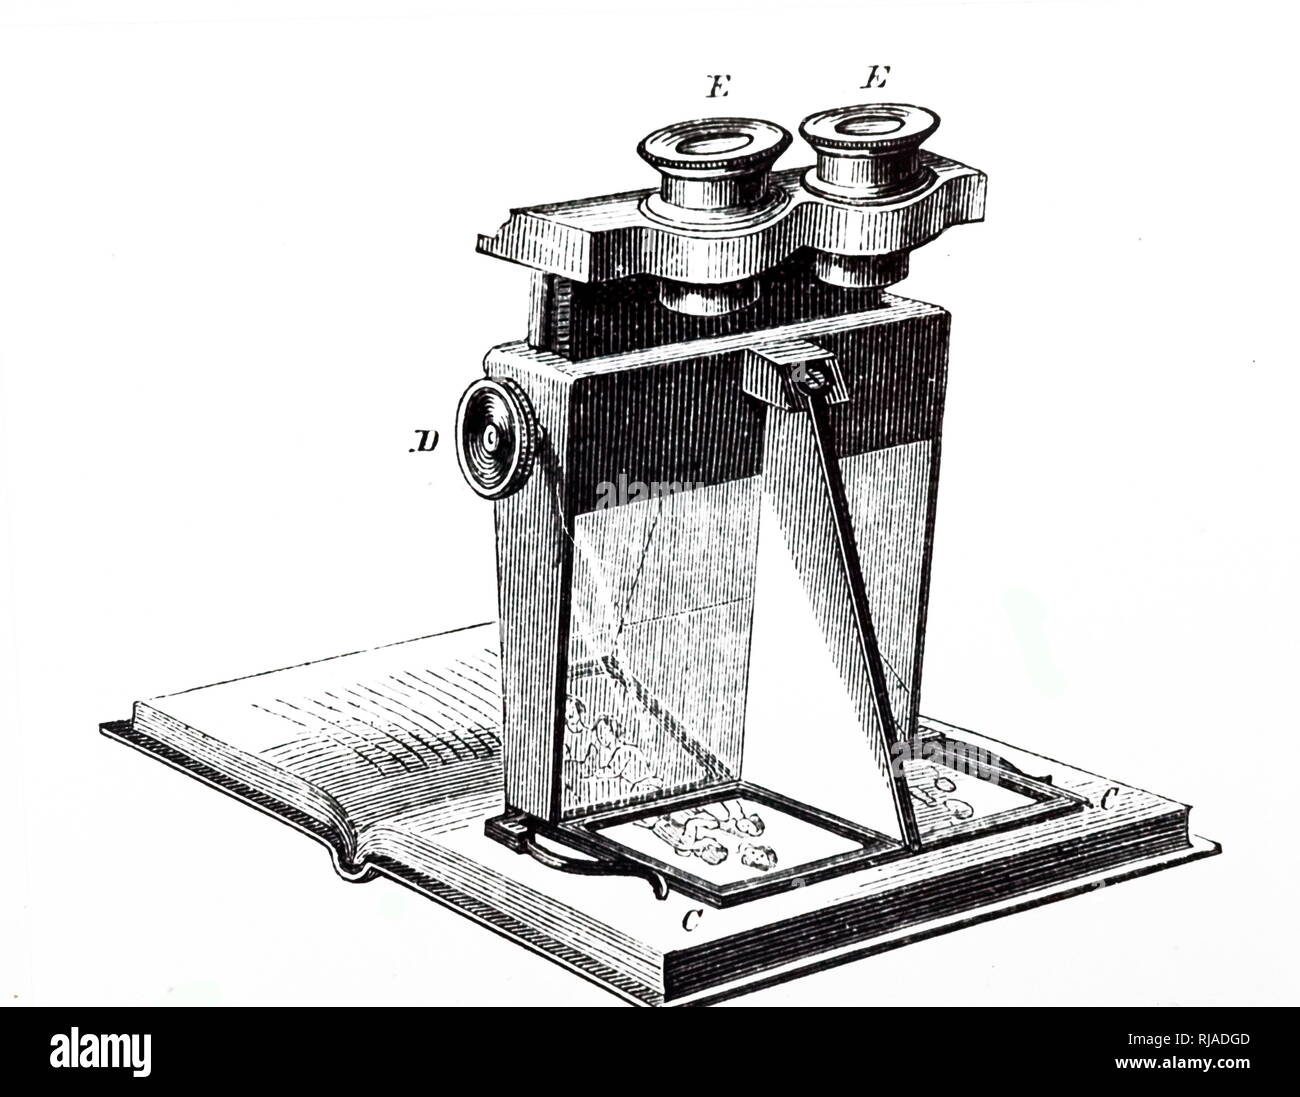 An engraving depicting a stereoscopic viewer with prismatic lenses, based on Brewster's design. Dated 19th century Stock Photo